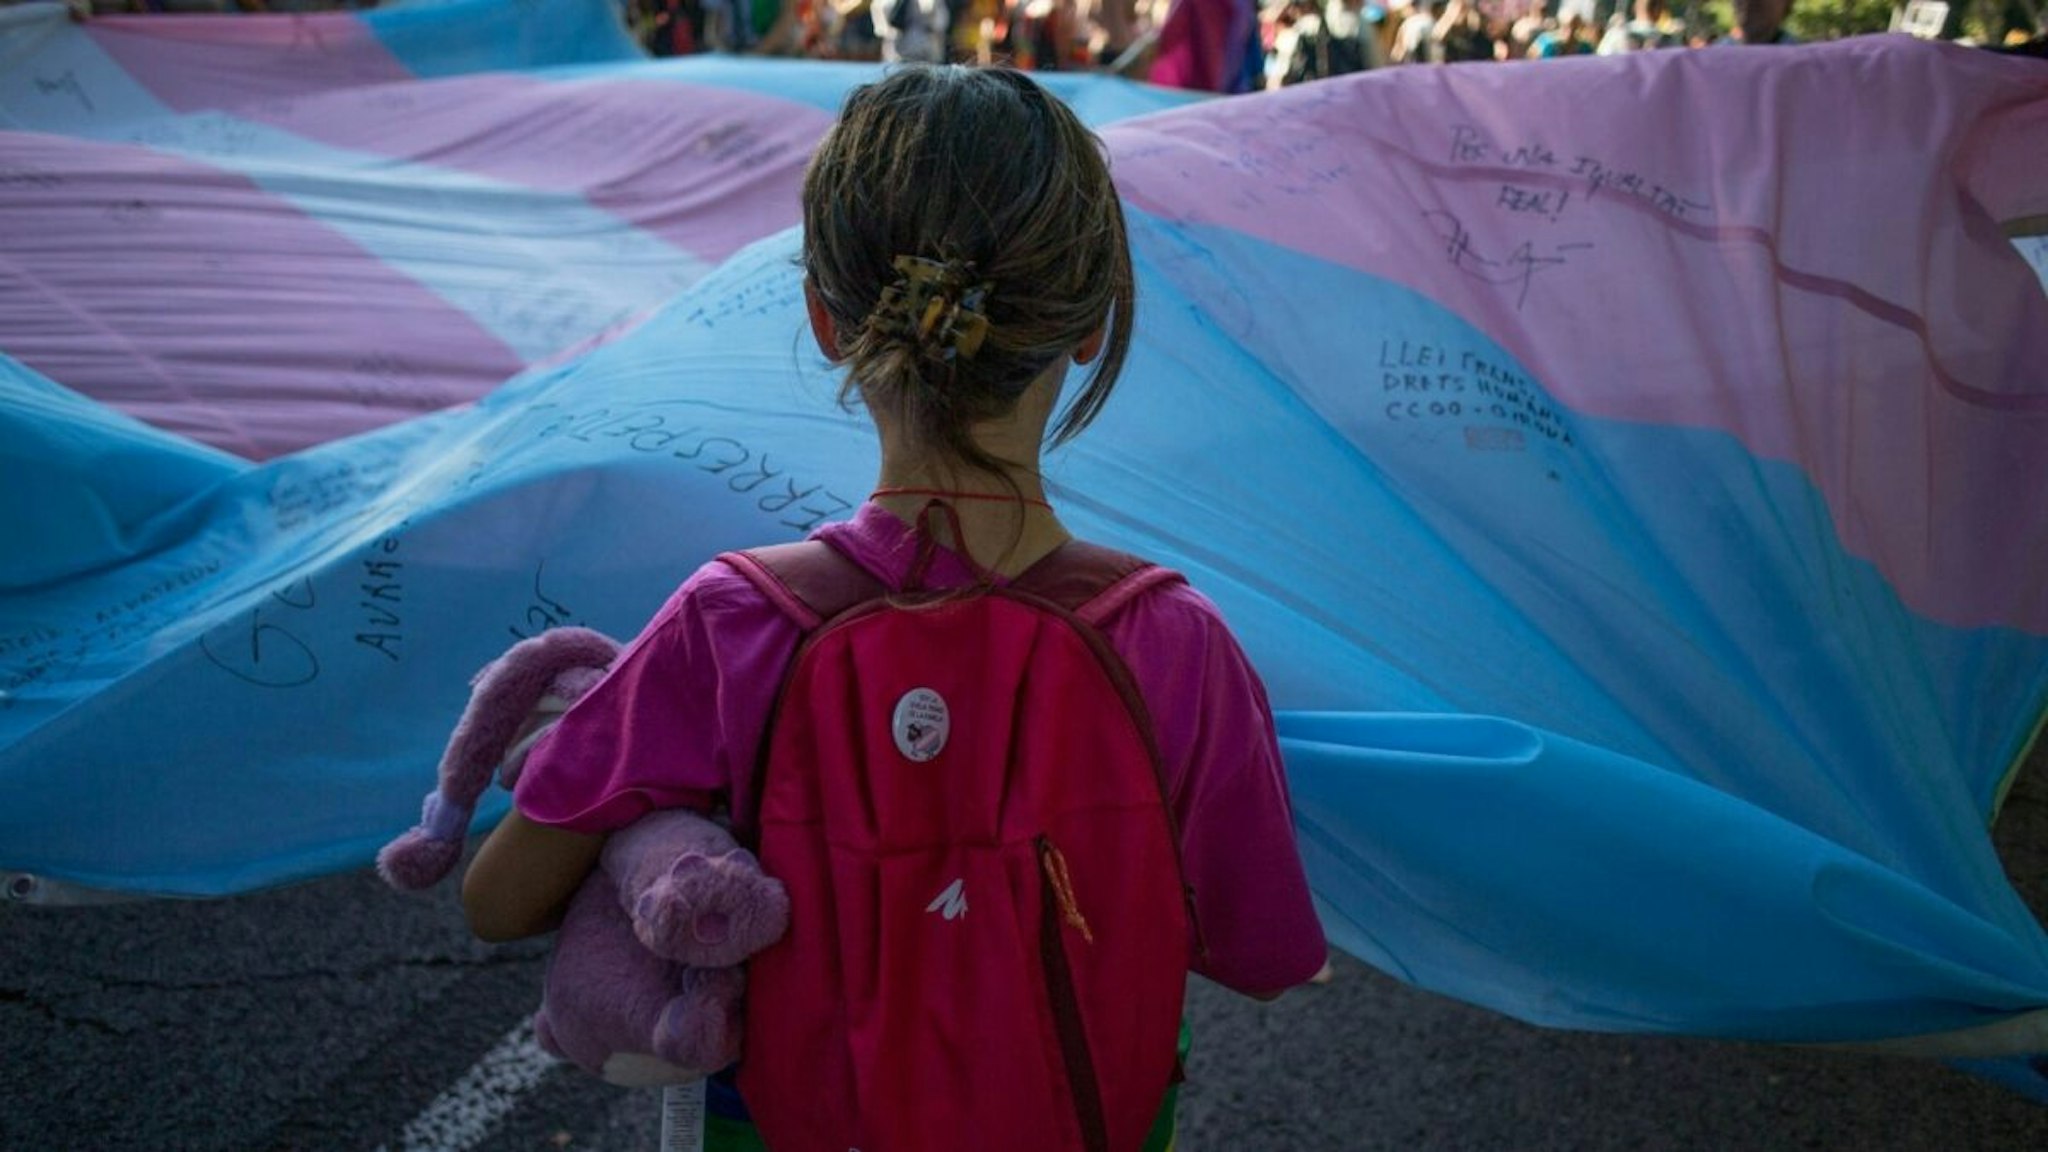 MADRID, SPAIN - 2022/07/09: A girl holds the Transgender Pride flag during the pride march held in one of the most important streets of Madrid.